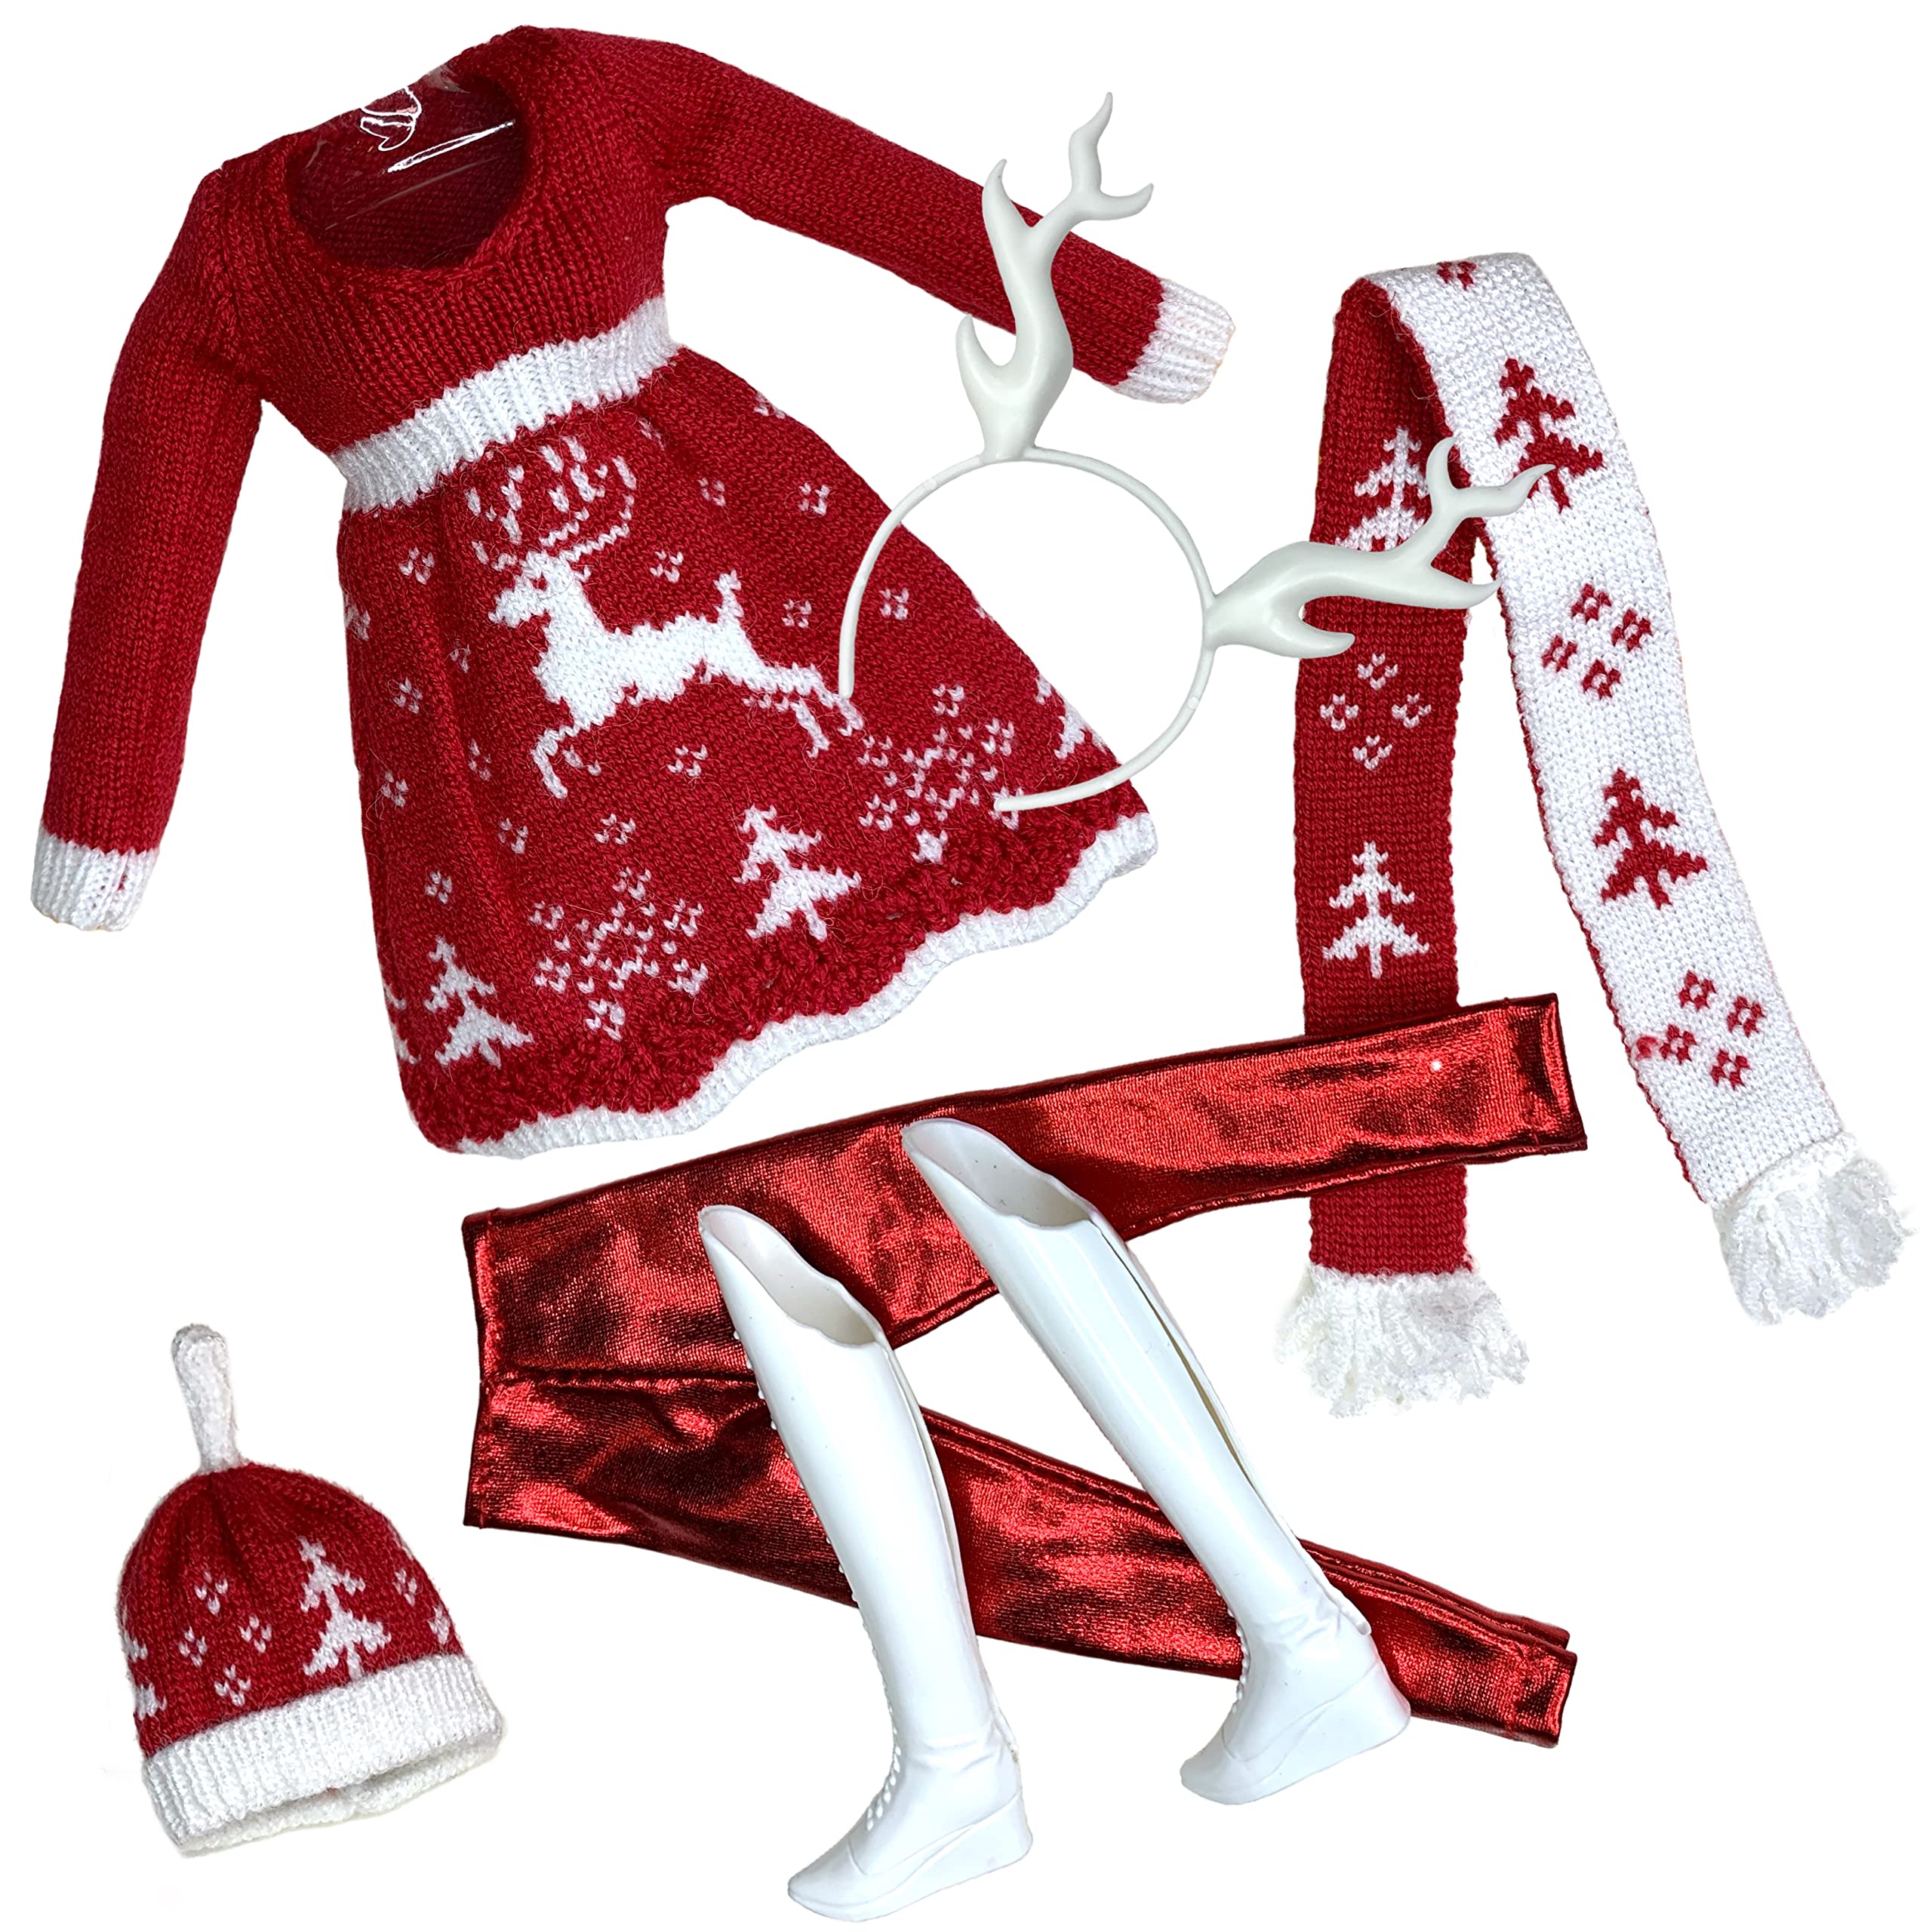 Eledoll 11.5 inch Doll Clothes Lot Deluxe Fashion Pack Holiday Christmas Miss Santa Knitted Deer Outfit with White Boots